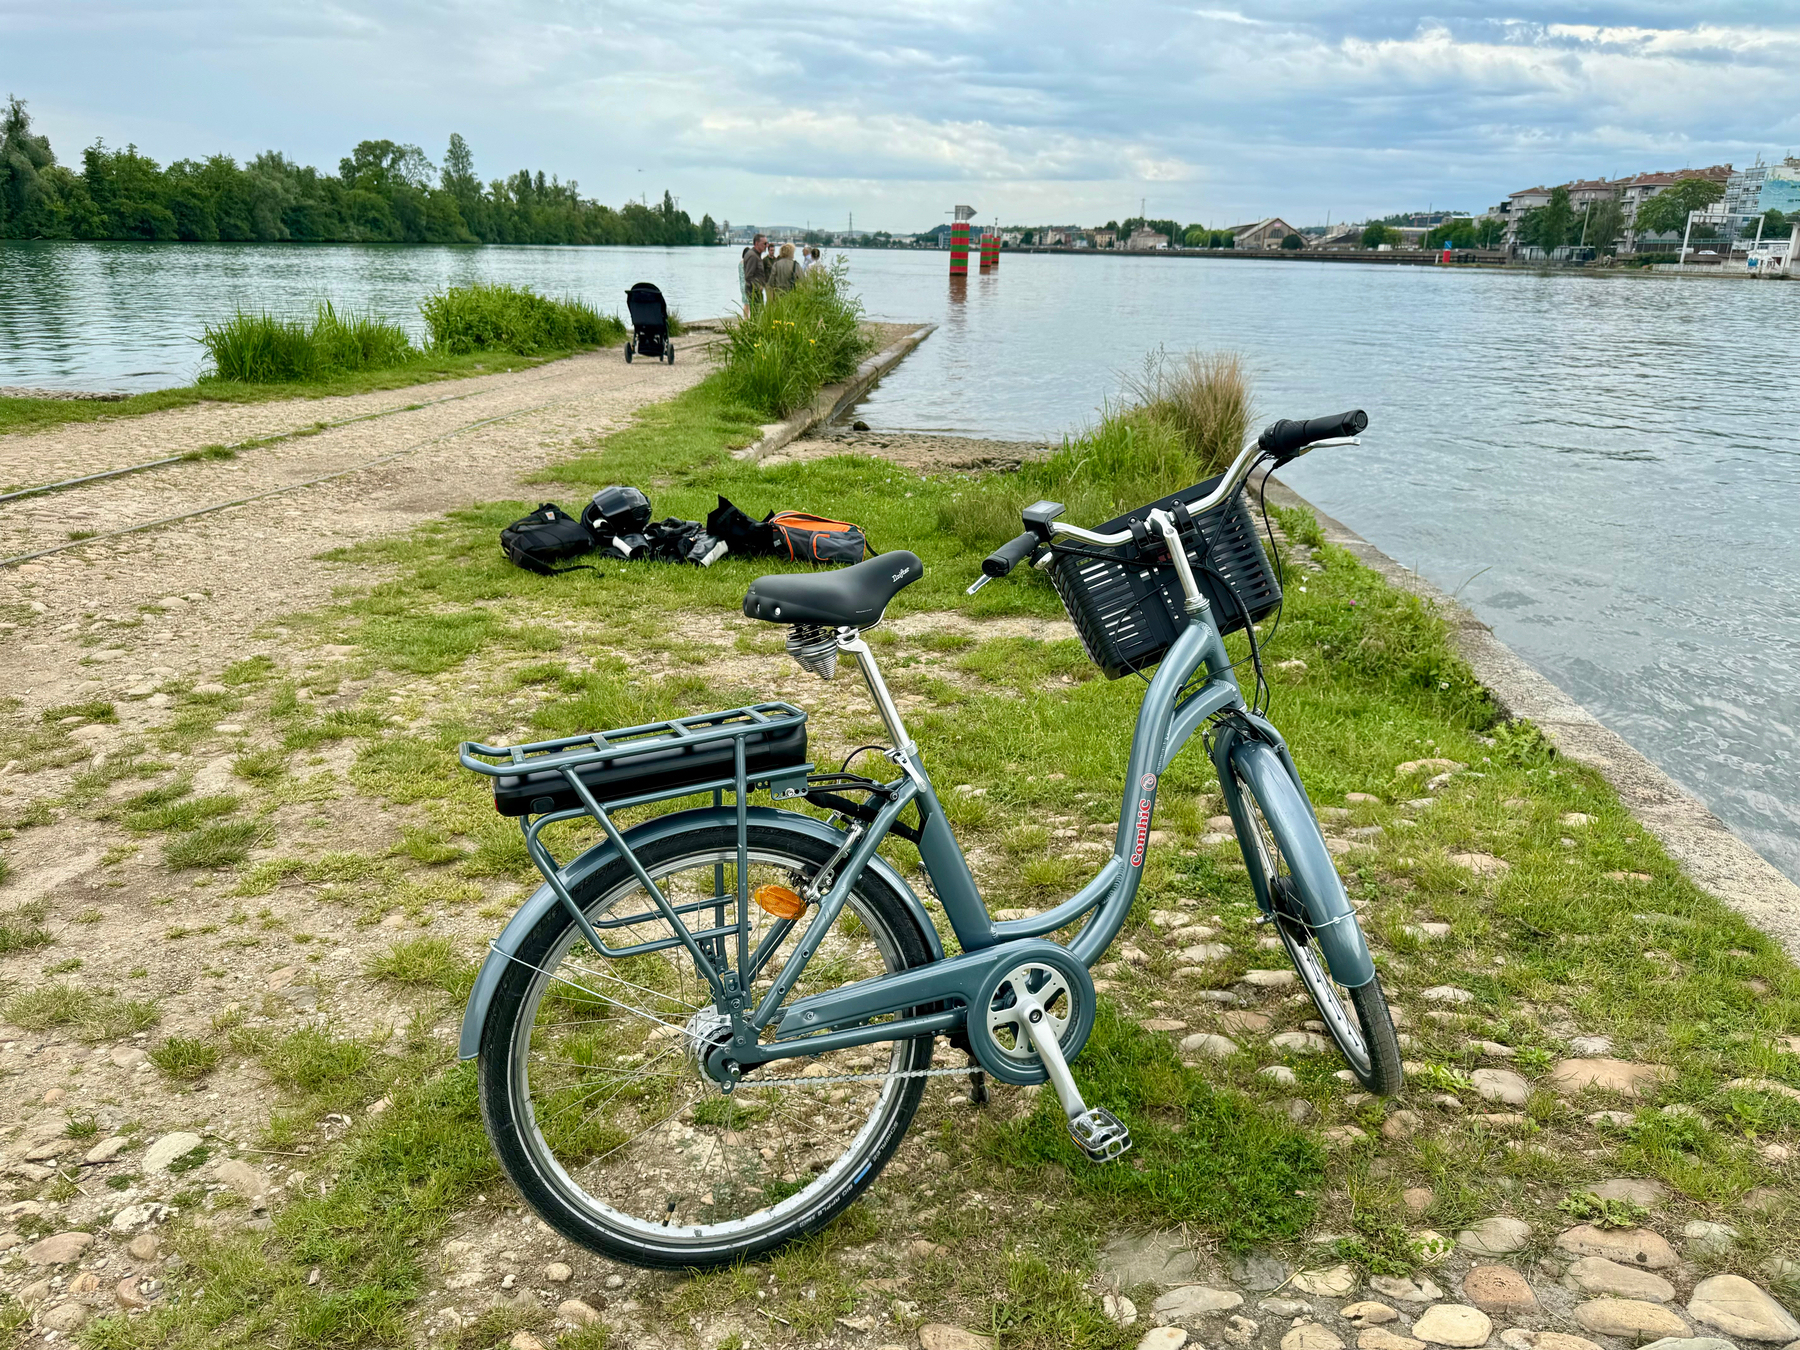 A bicycle parked on a grassy riverbank with personal belongings scattered nearby and people walking in the background. In the background, the confluence of the Saône and Rhône rivers